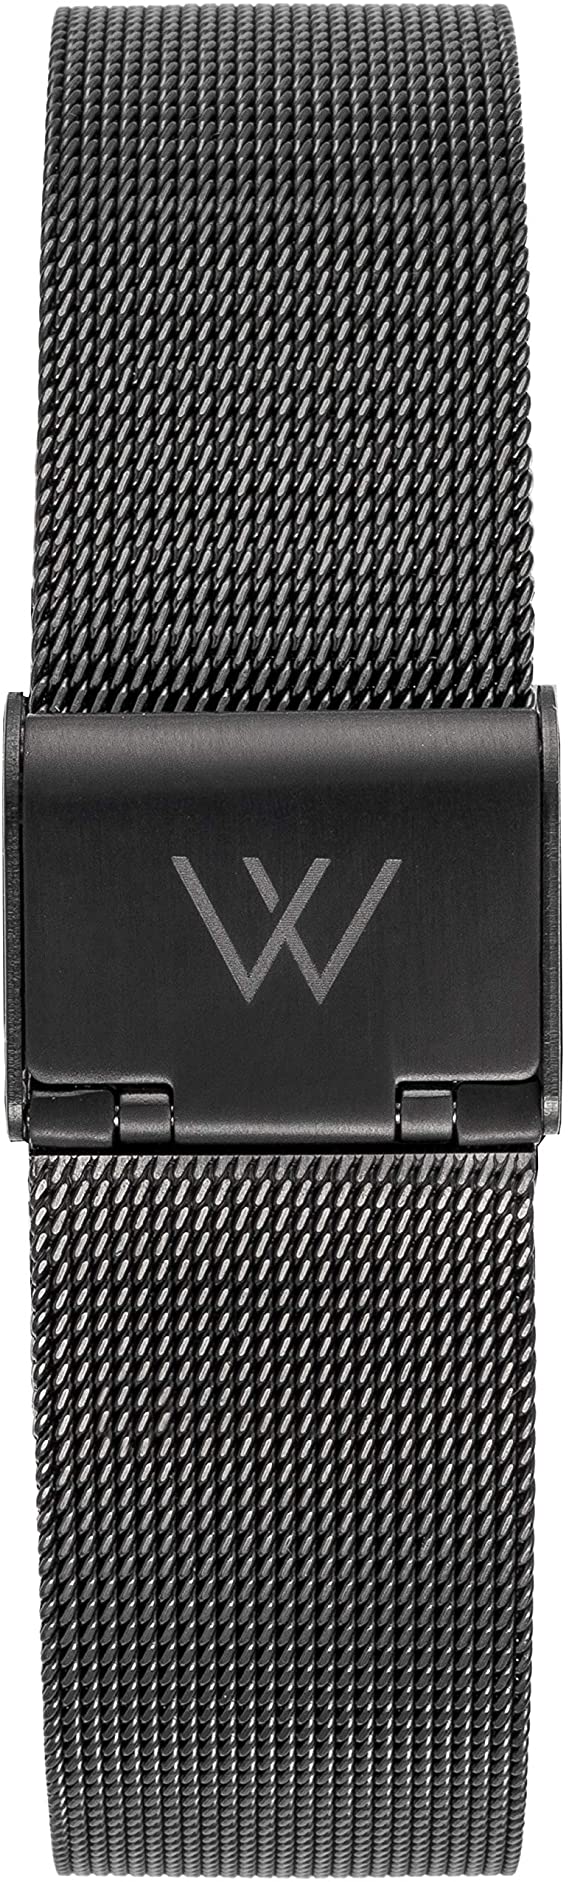 WRISTOLOGY Quick Release Adjustable Interchangeable Metal Link Mesh Milanese Stainless Steel Watch Band in Silver Rose Gold for Men Women - 14, 16, 18, 20 MM